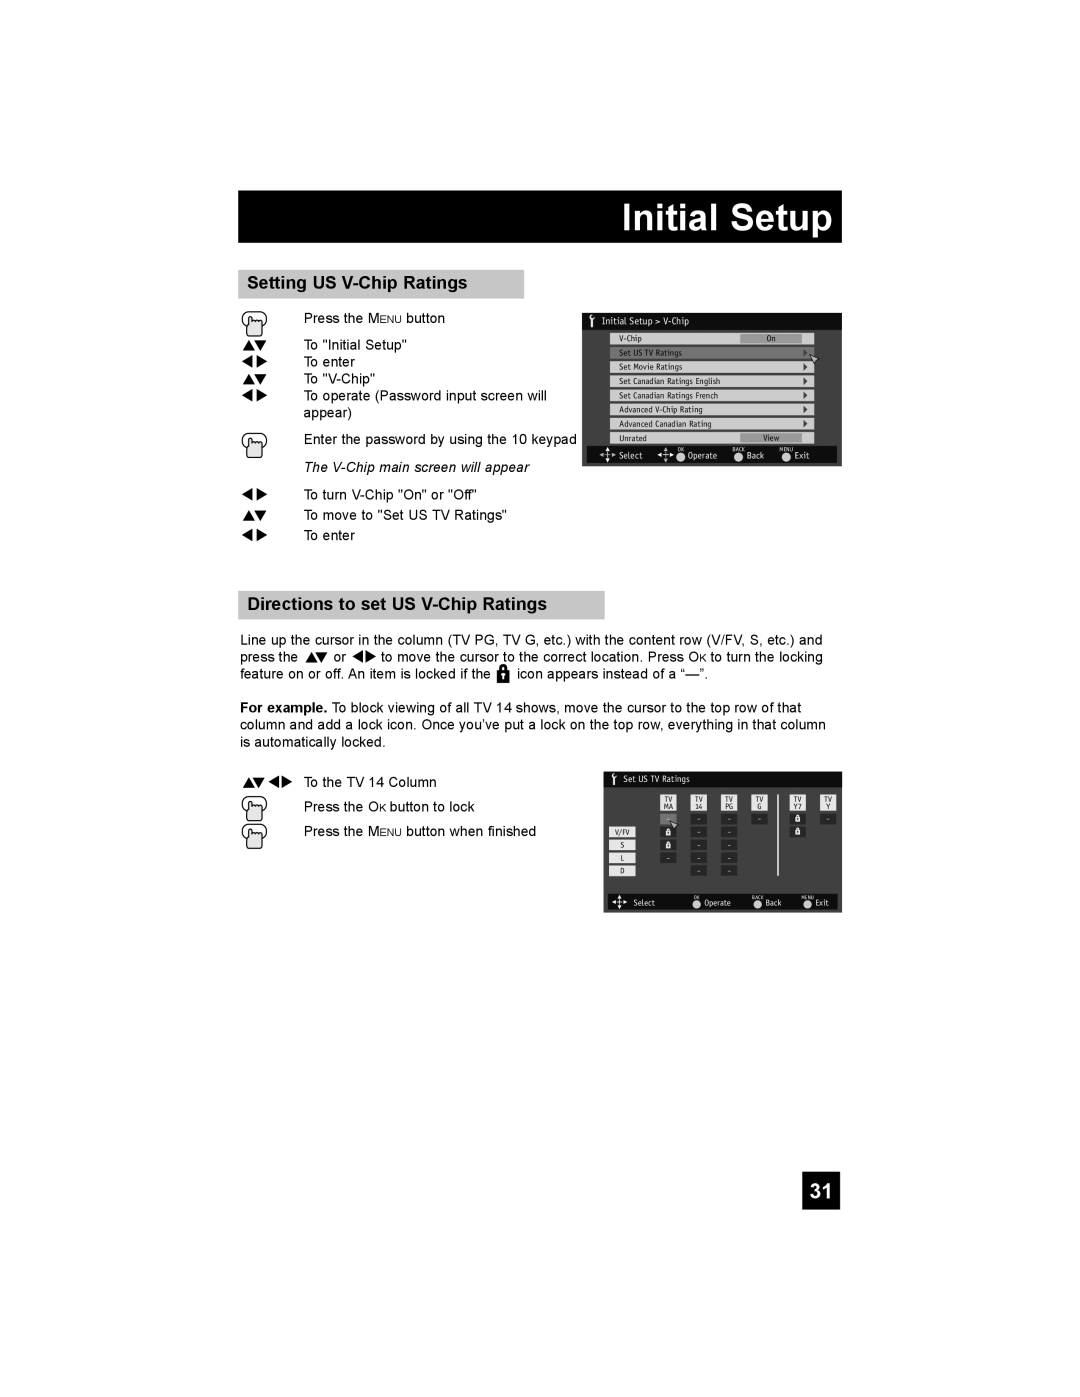 JVC LT-37X688 manual Setting US V-Chip Ratings, Directions to set US V-Chip Ratings, π†√ To the TV 14 Column, Initial Setup 